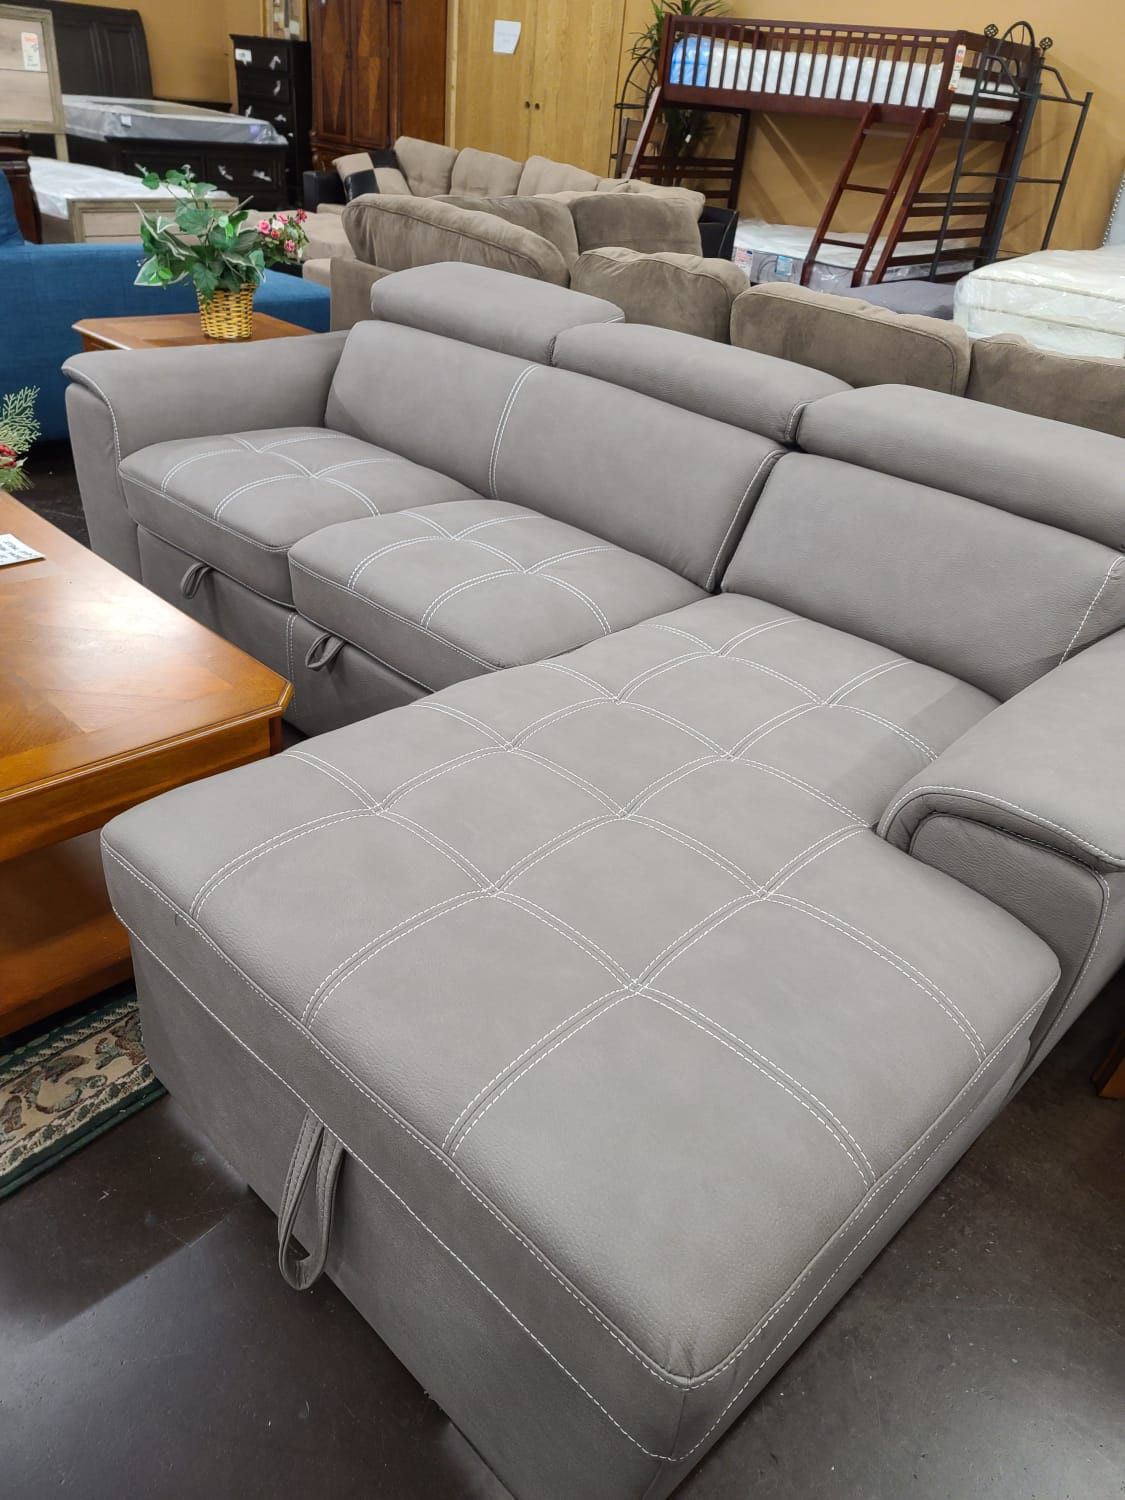 Sofa bed sectional with a storage chaise and pullout bed